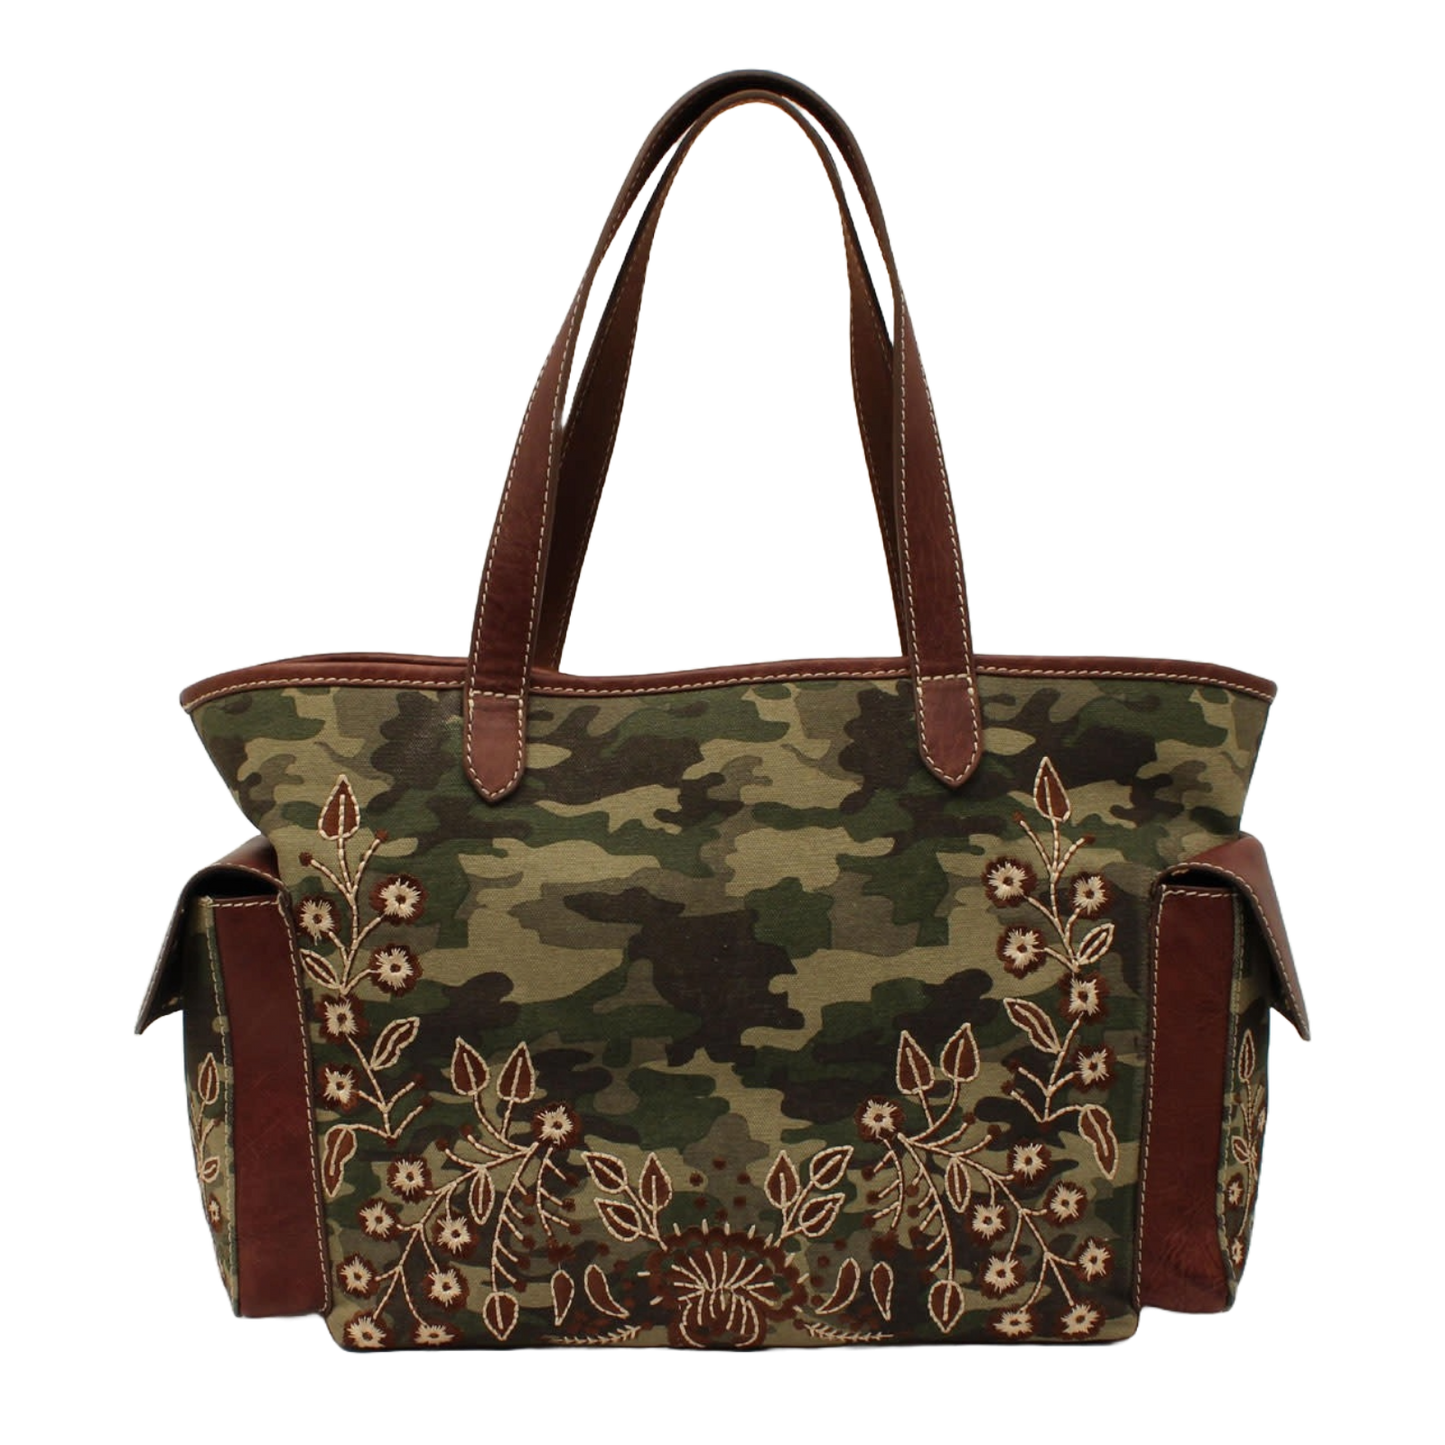 Nocona Satchel Camo Style Flower Embroidered Brown Bag N770009202